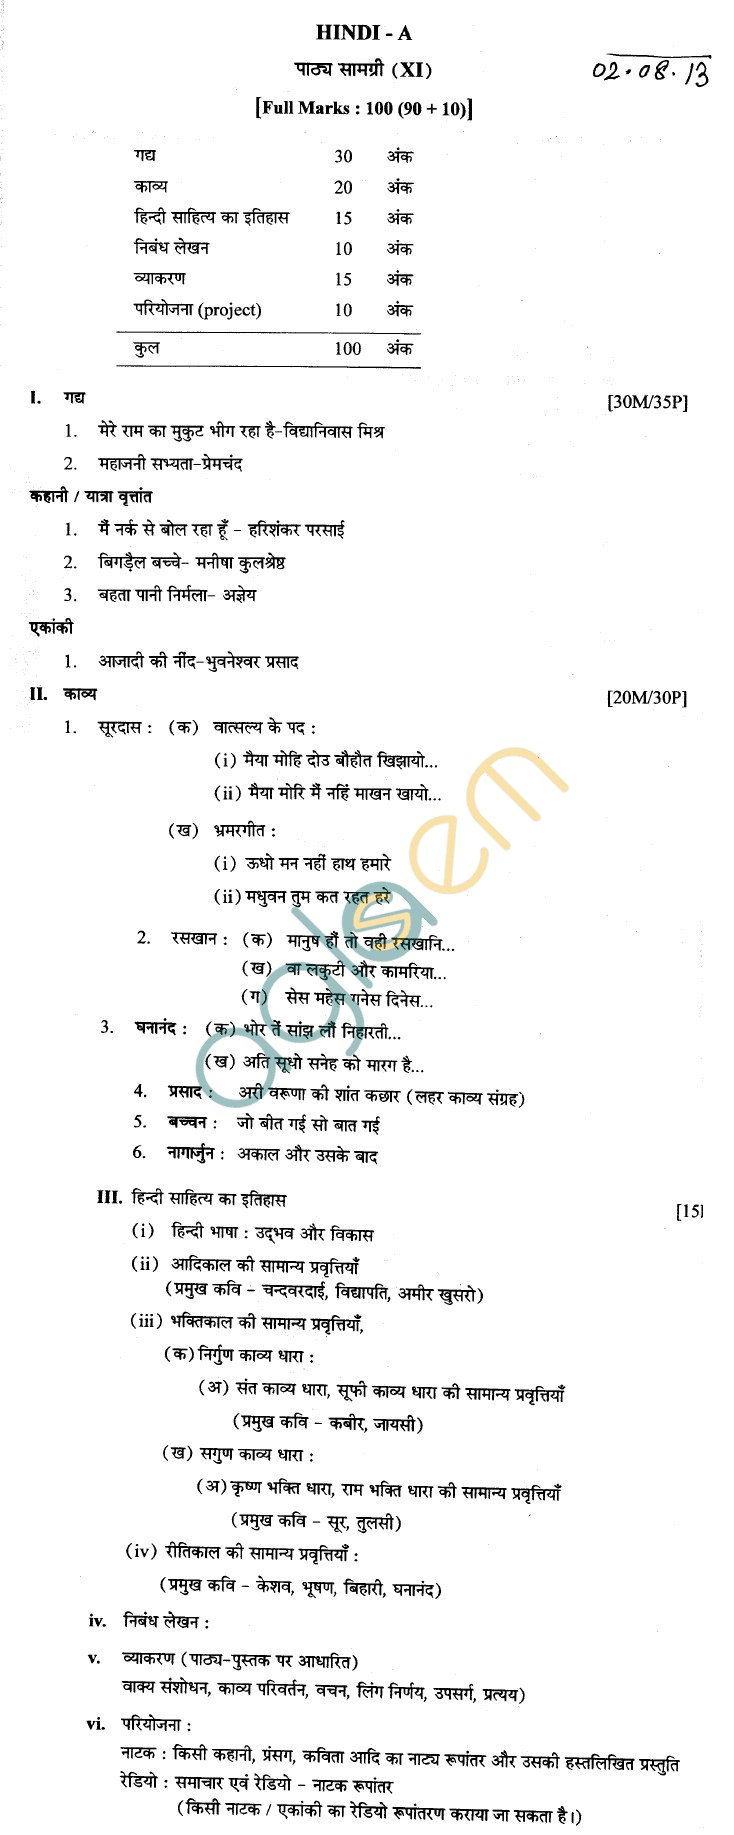 West Bengal Board Syllabus for Class 11 - Hindi A